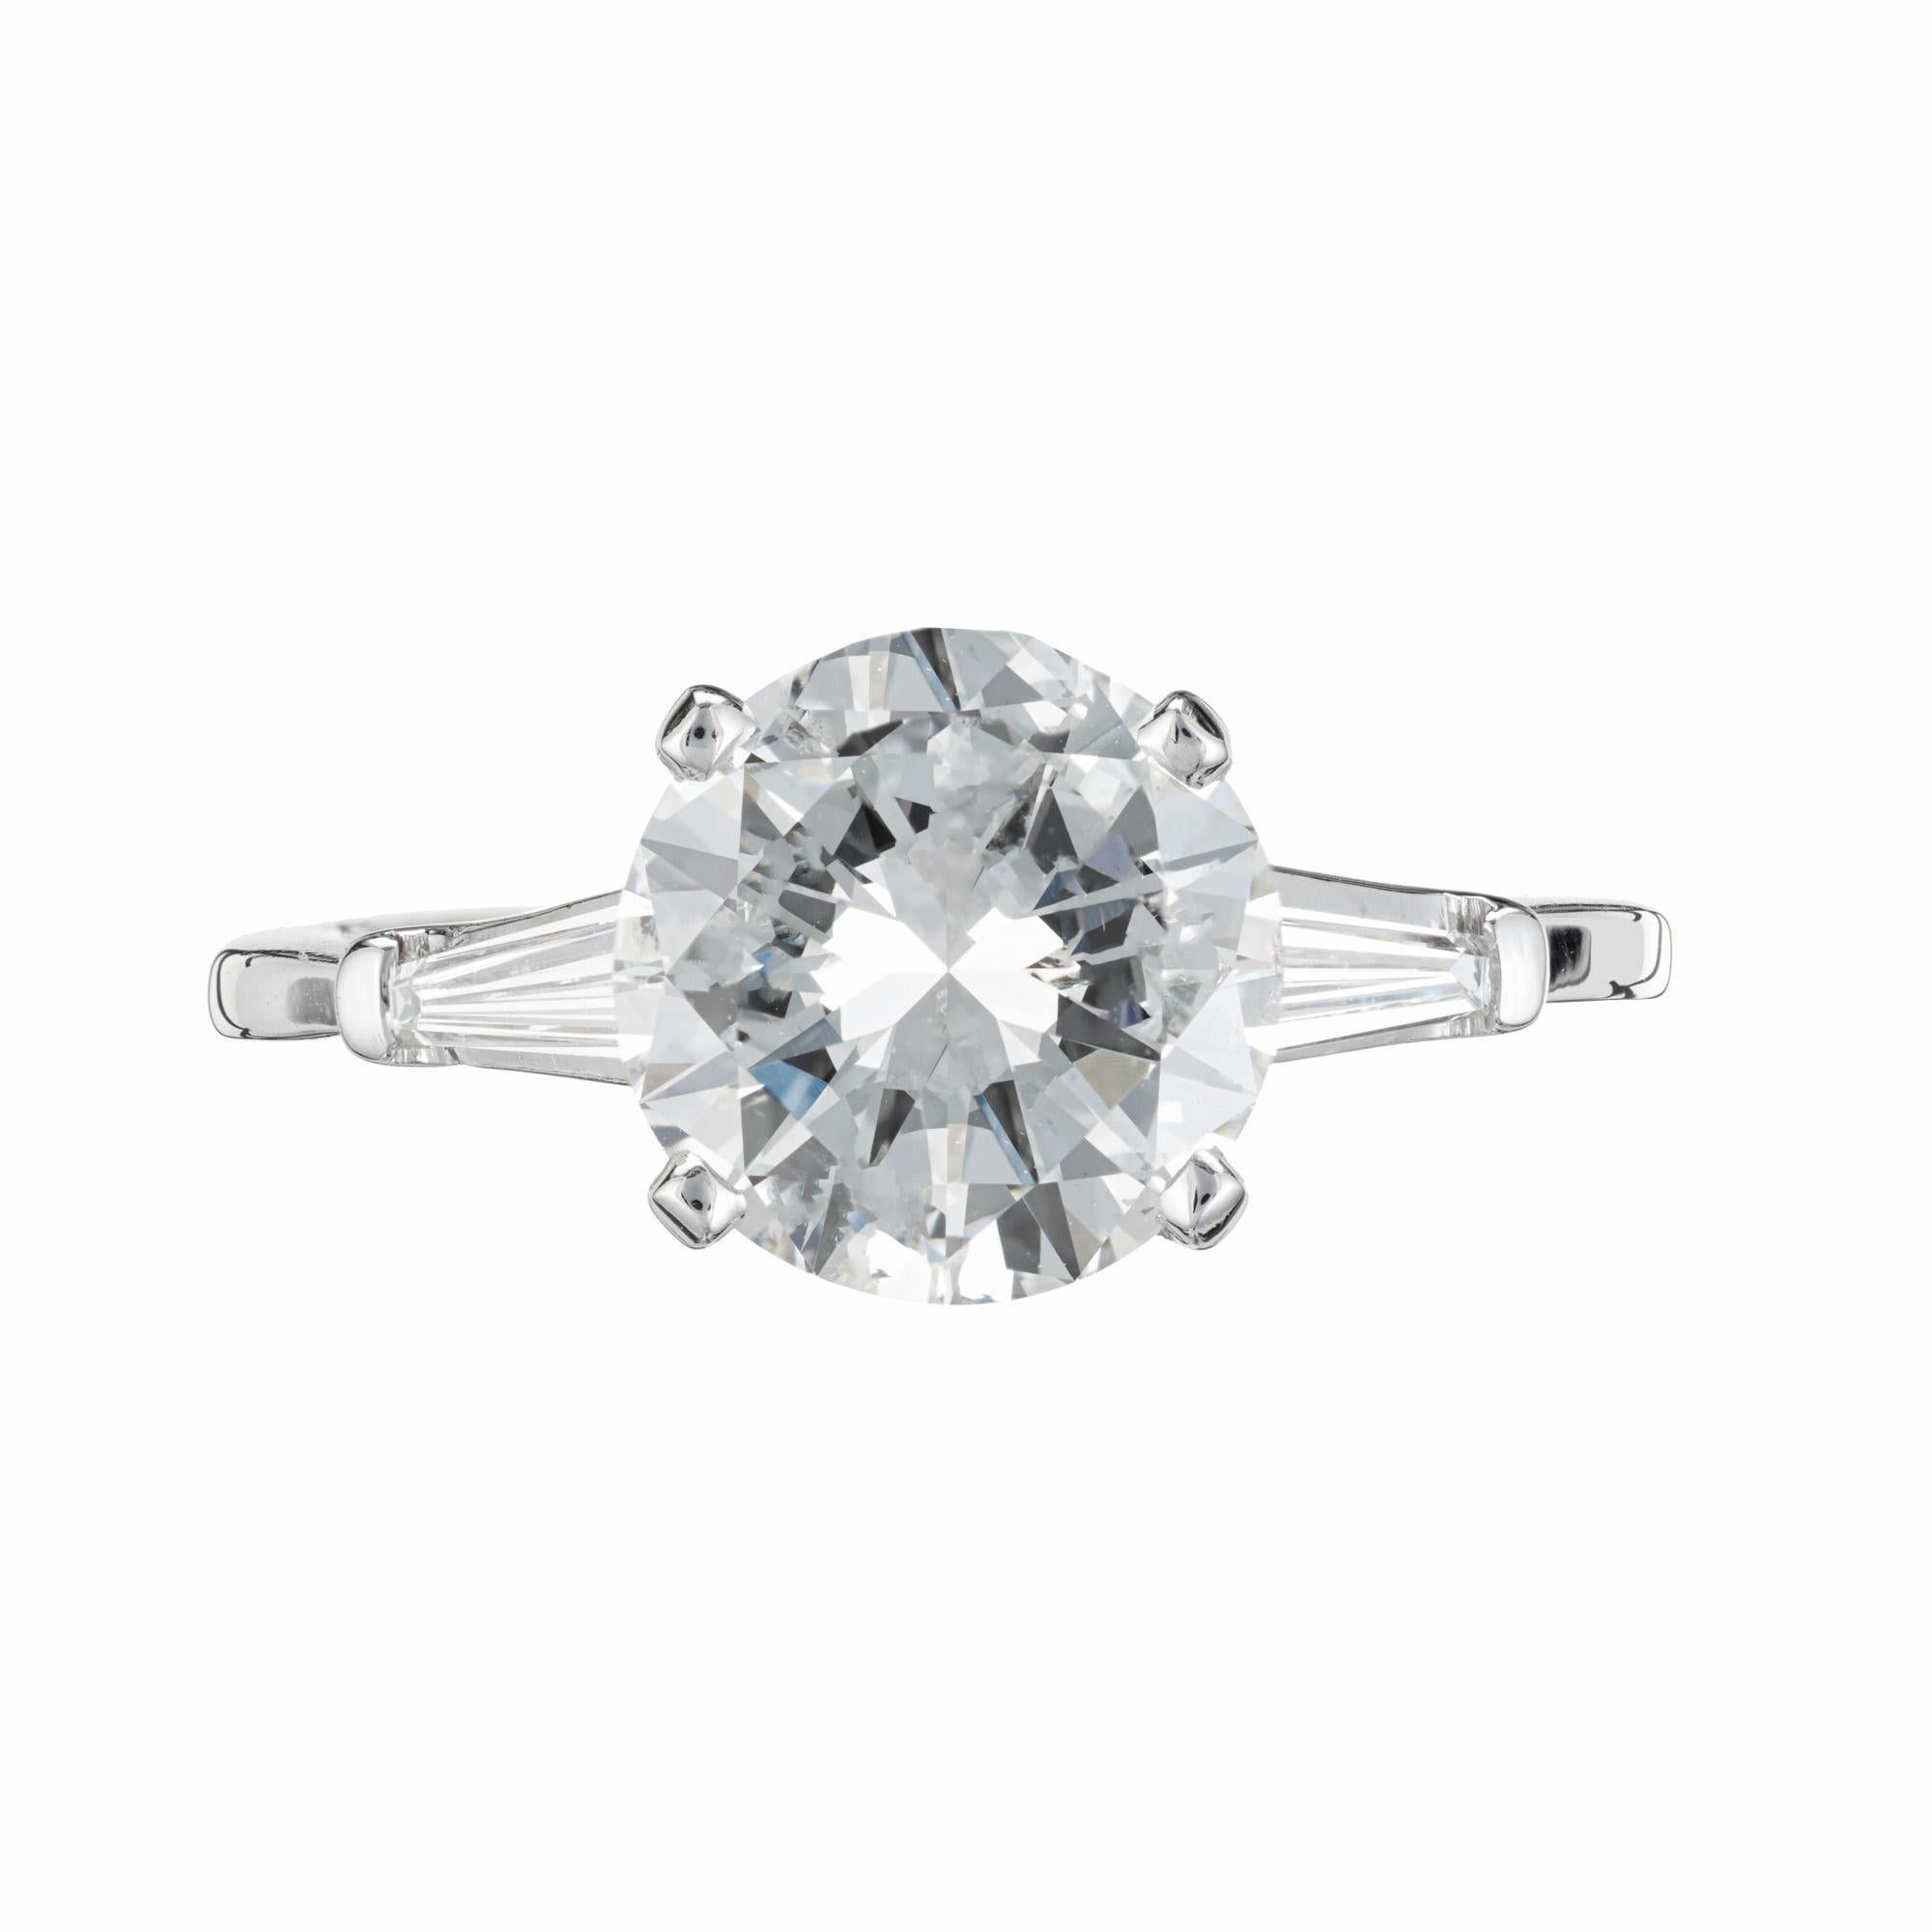 Diamond three-stone engagement ring. EGL certified 2.71ct round brilliant cut center diamond in a simple four prong platinum setting with two tapered baguette accent diamonds. The main diamond has great brilliance and is graded H-I. Classic